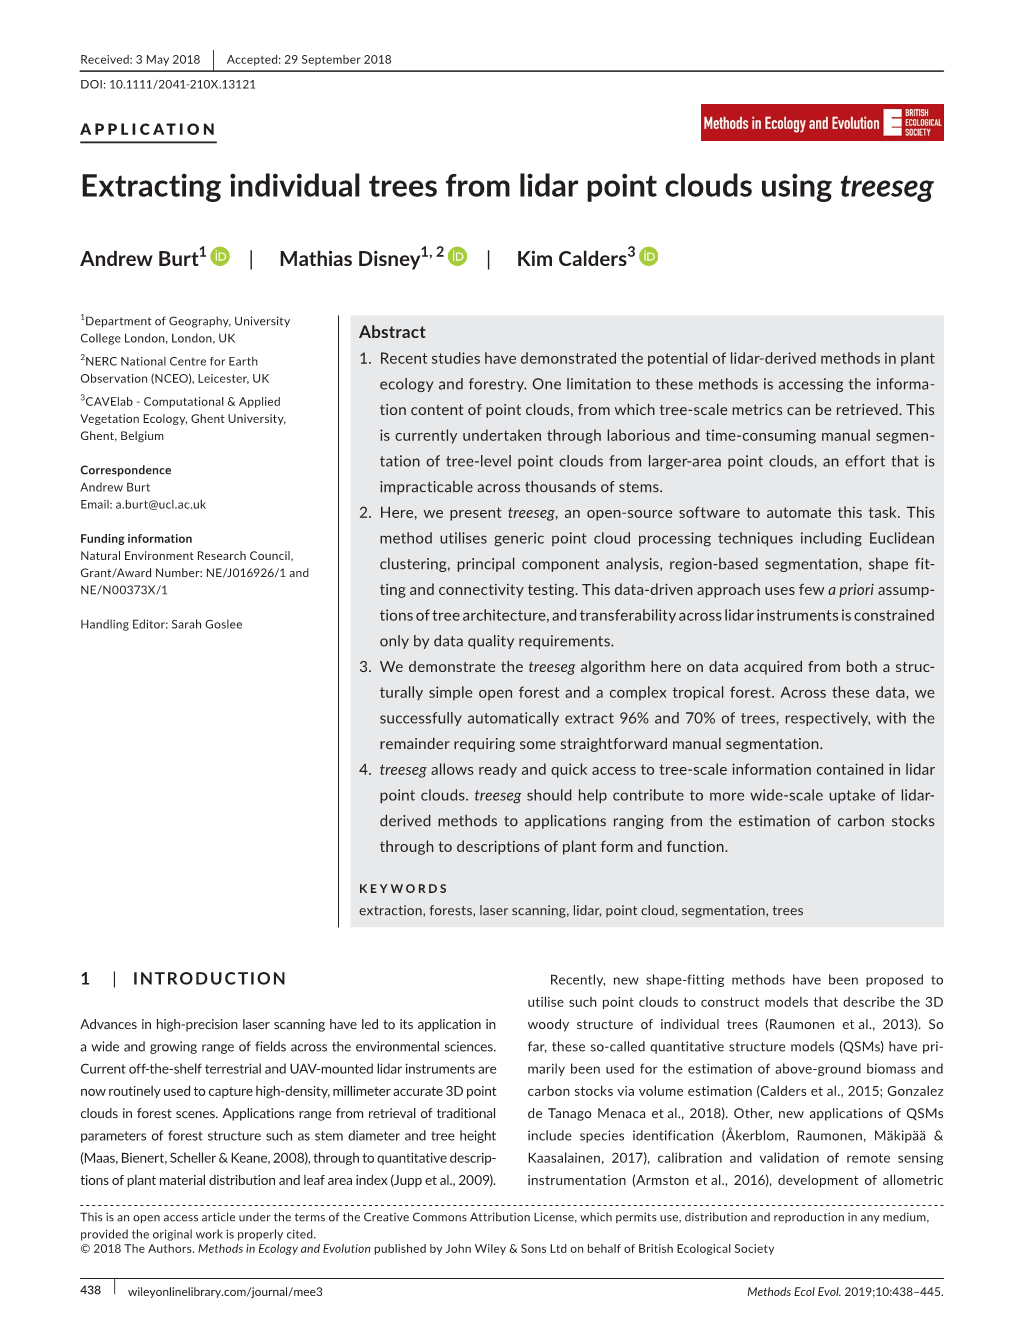 Extracting Individual Trees from Lidar Point Clouds Using Treeseg